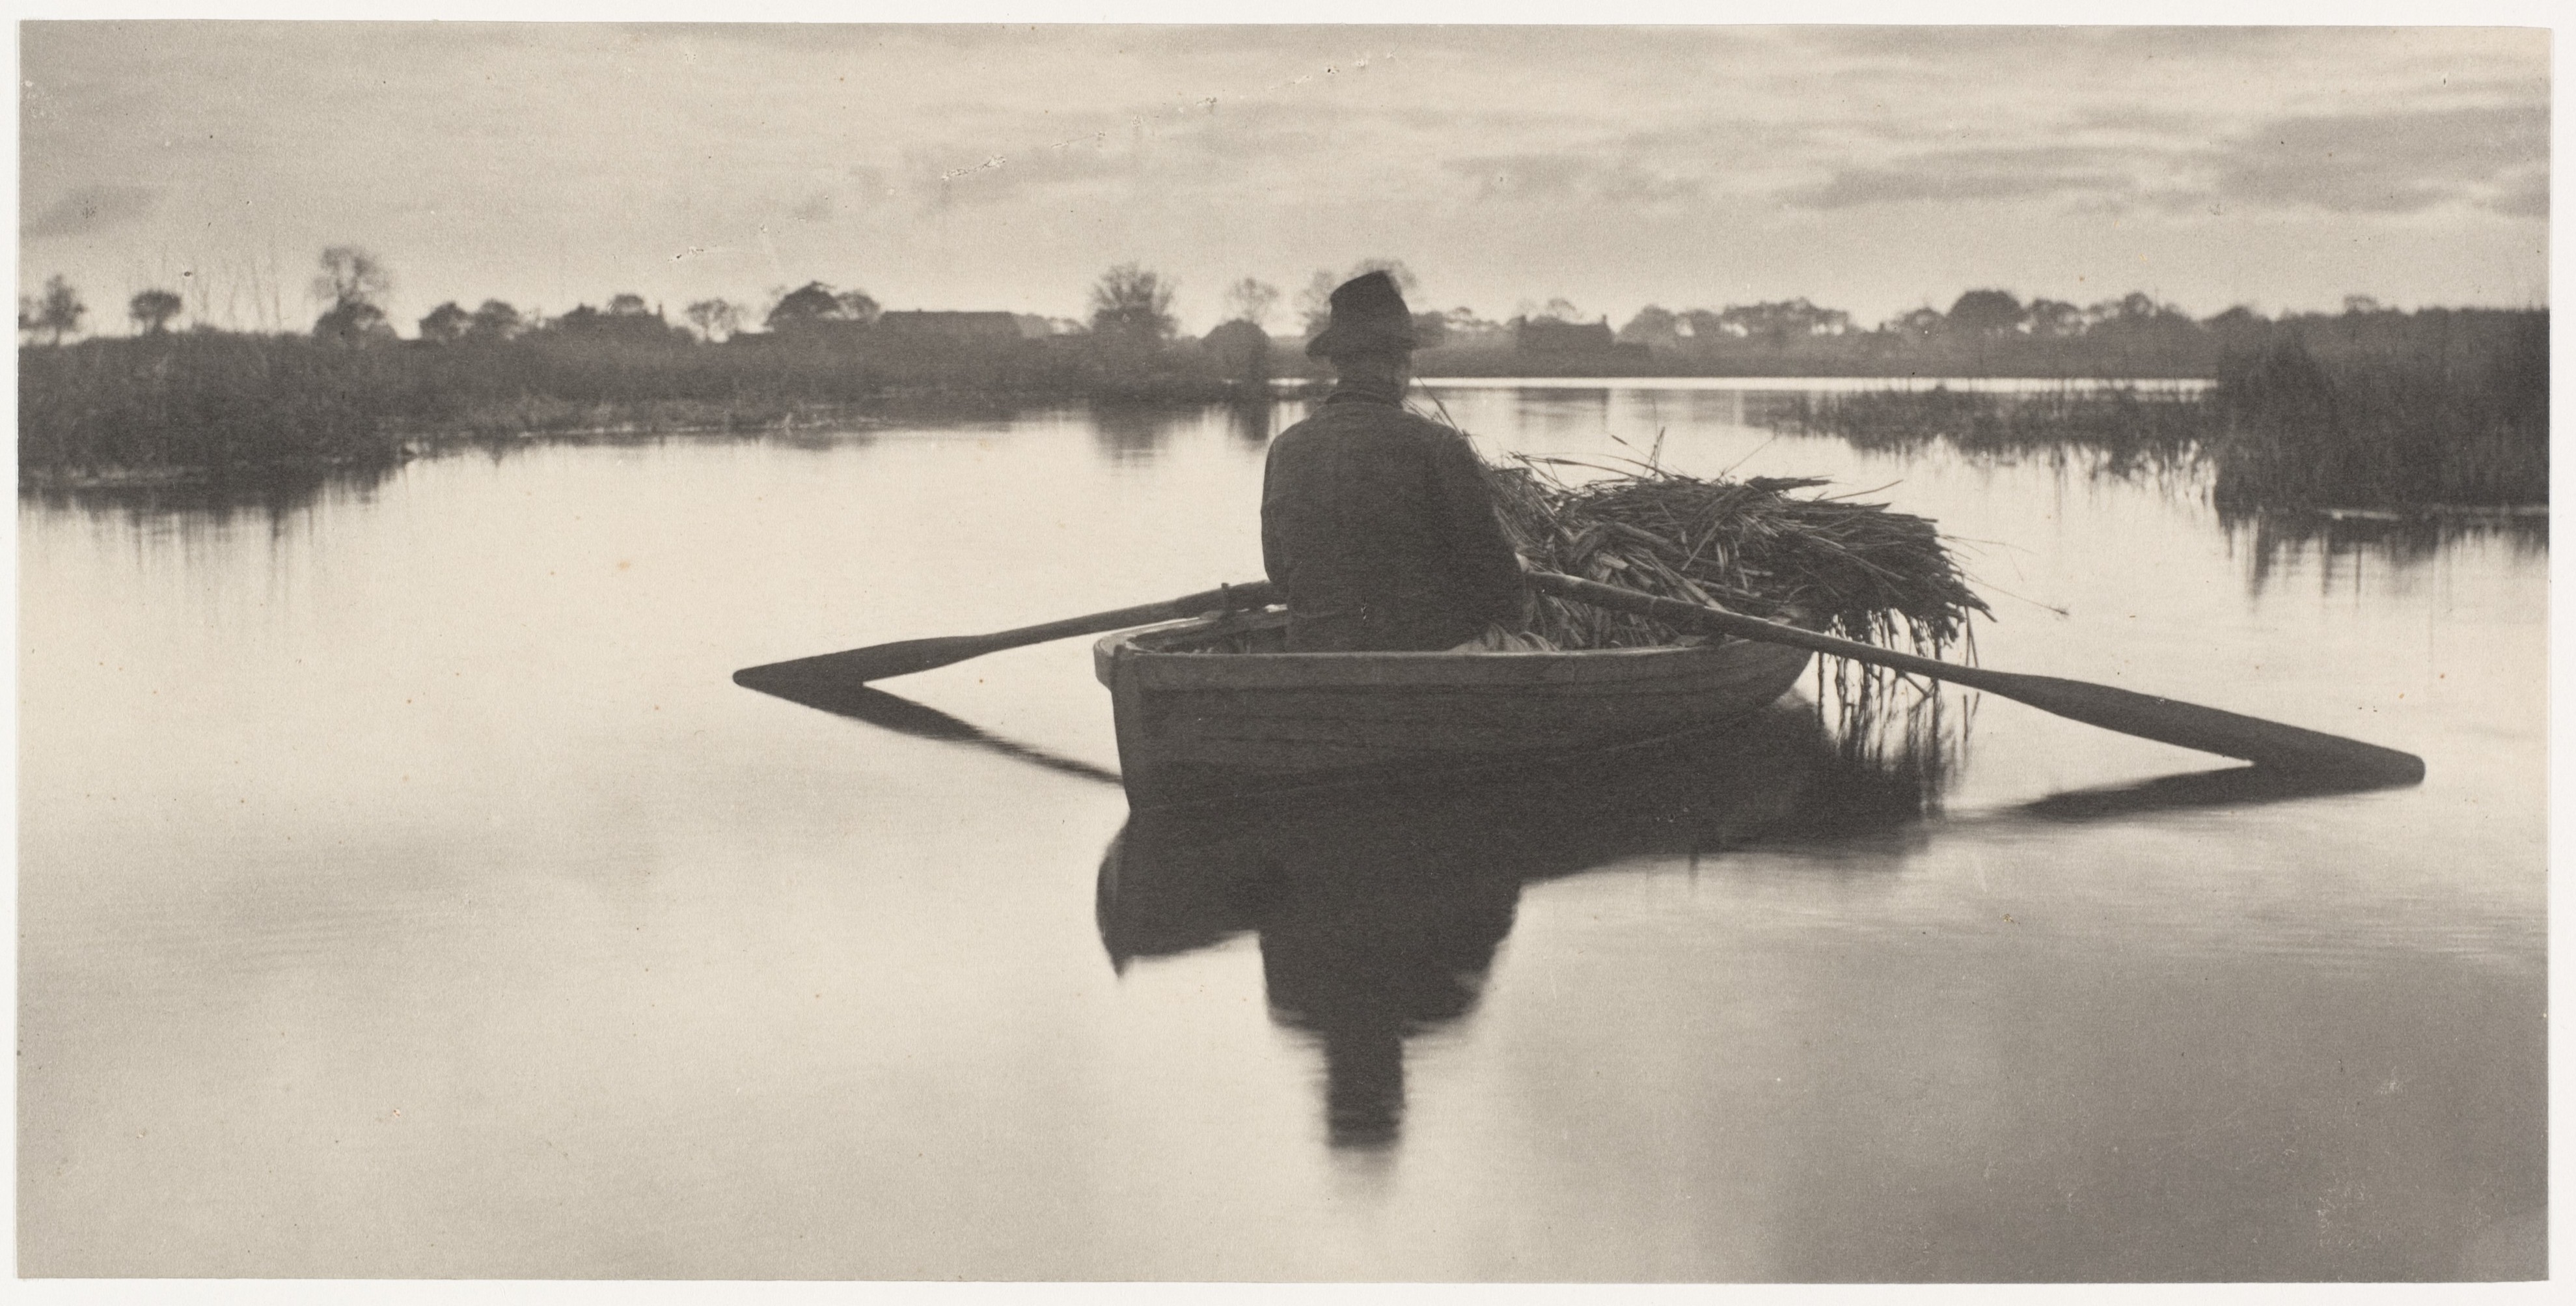 Rowing Home the School-Stuff, Peter Henry Emerson, 1886